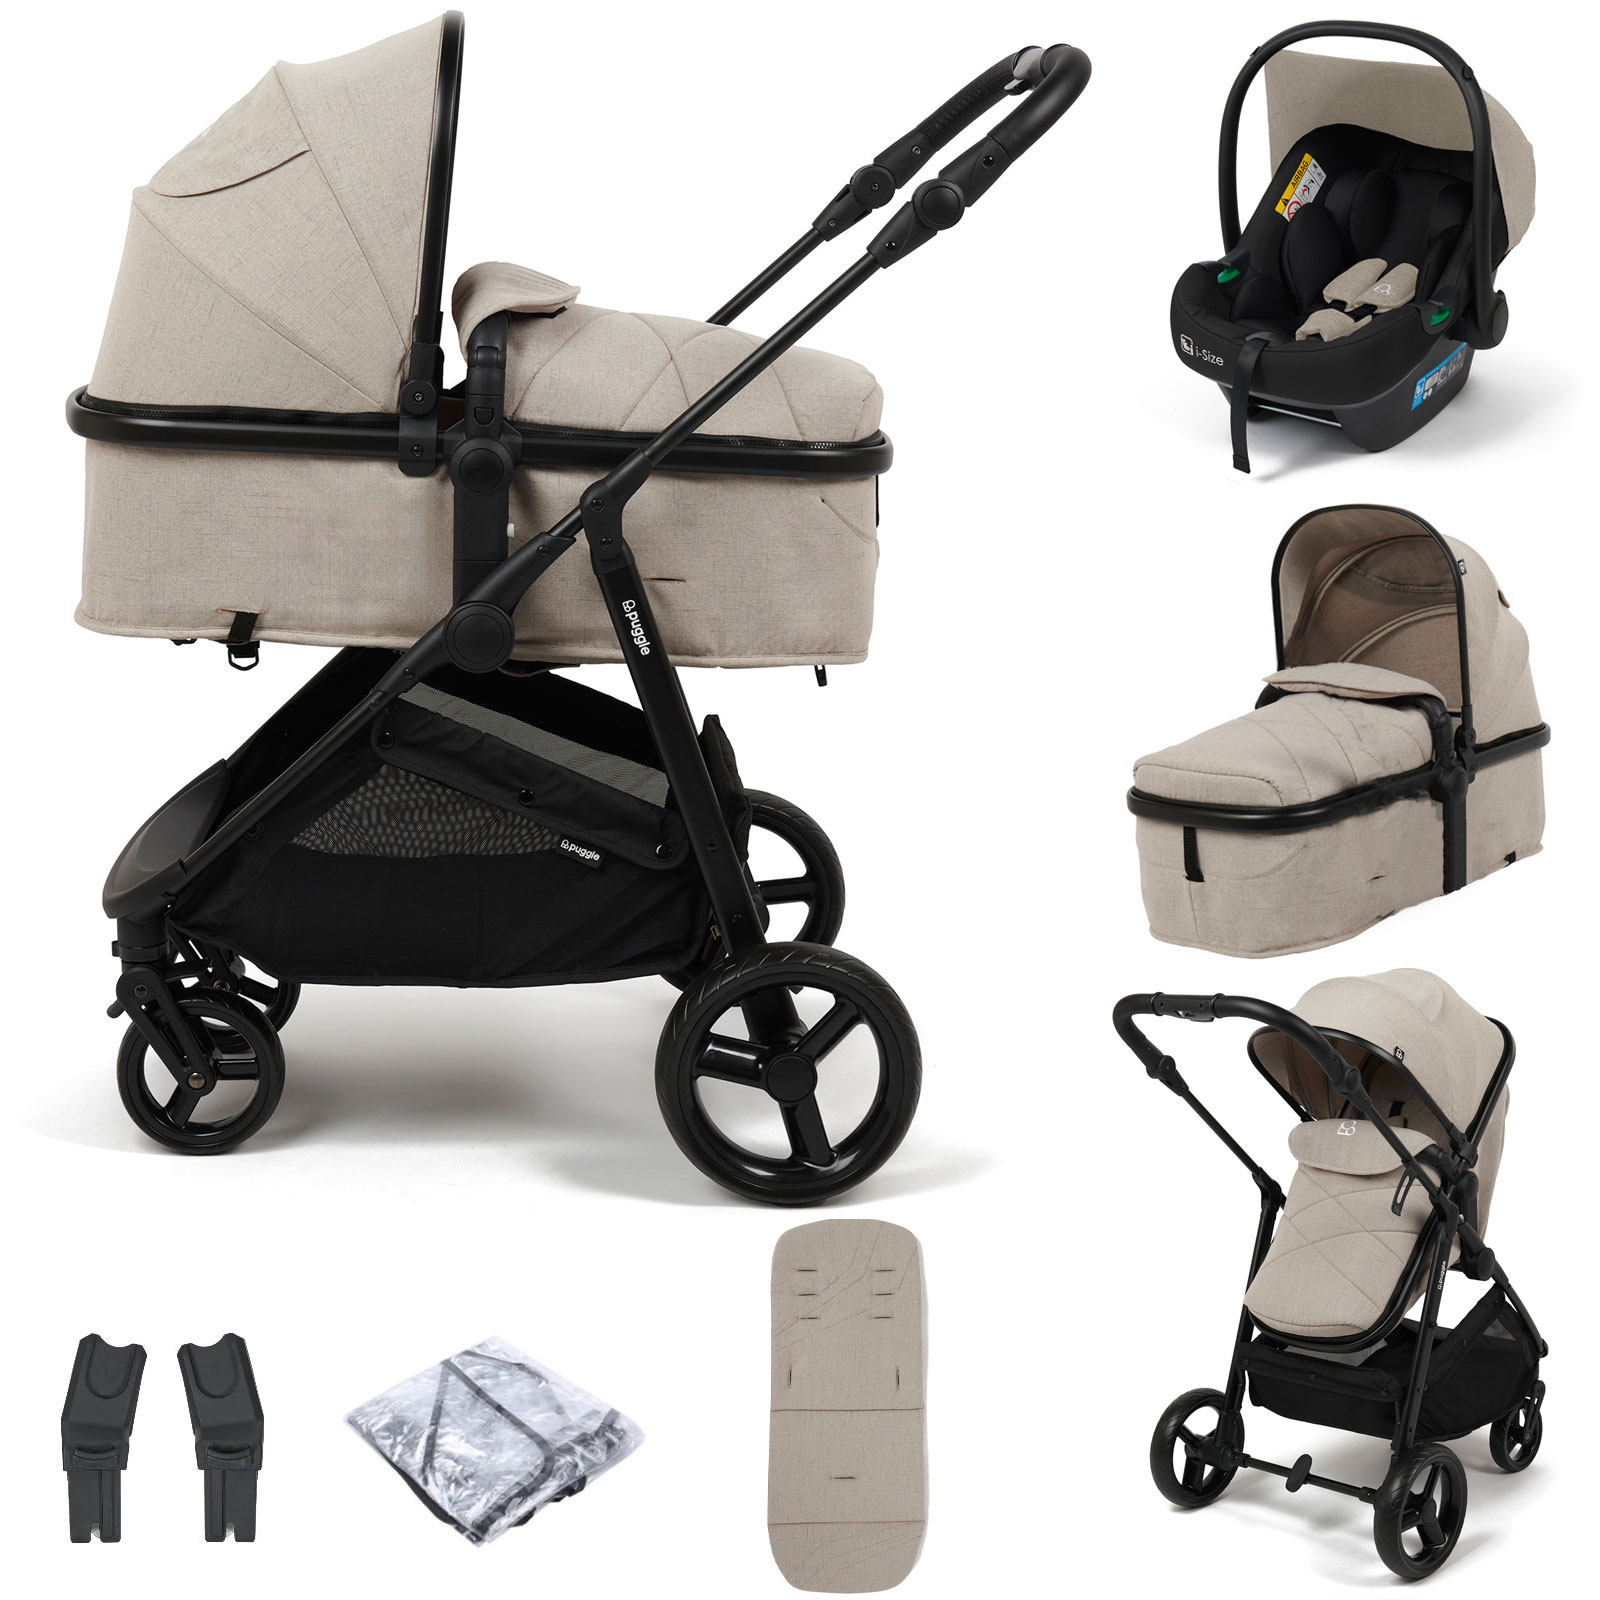 Puggle Monaco XT 2in1 Pushchair With Adjustable Handles i-Size Travel System - Cashmere